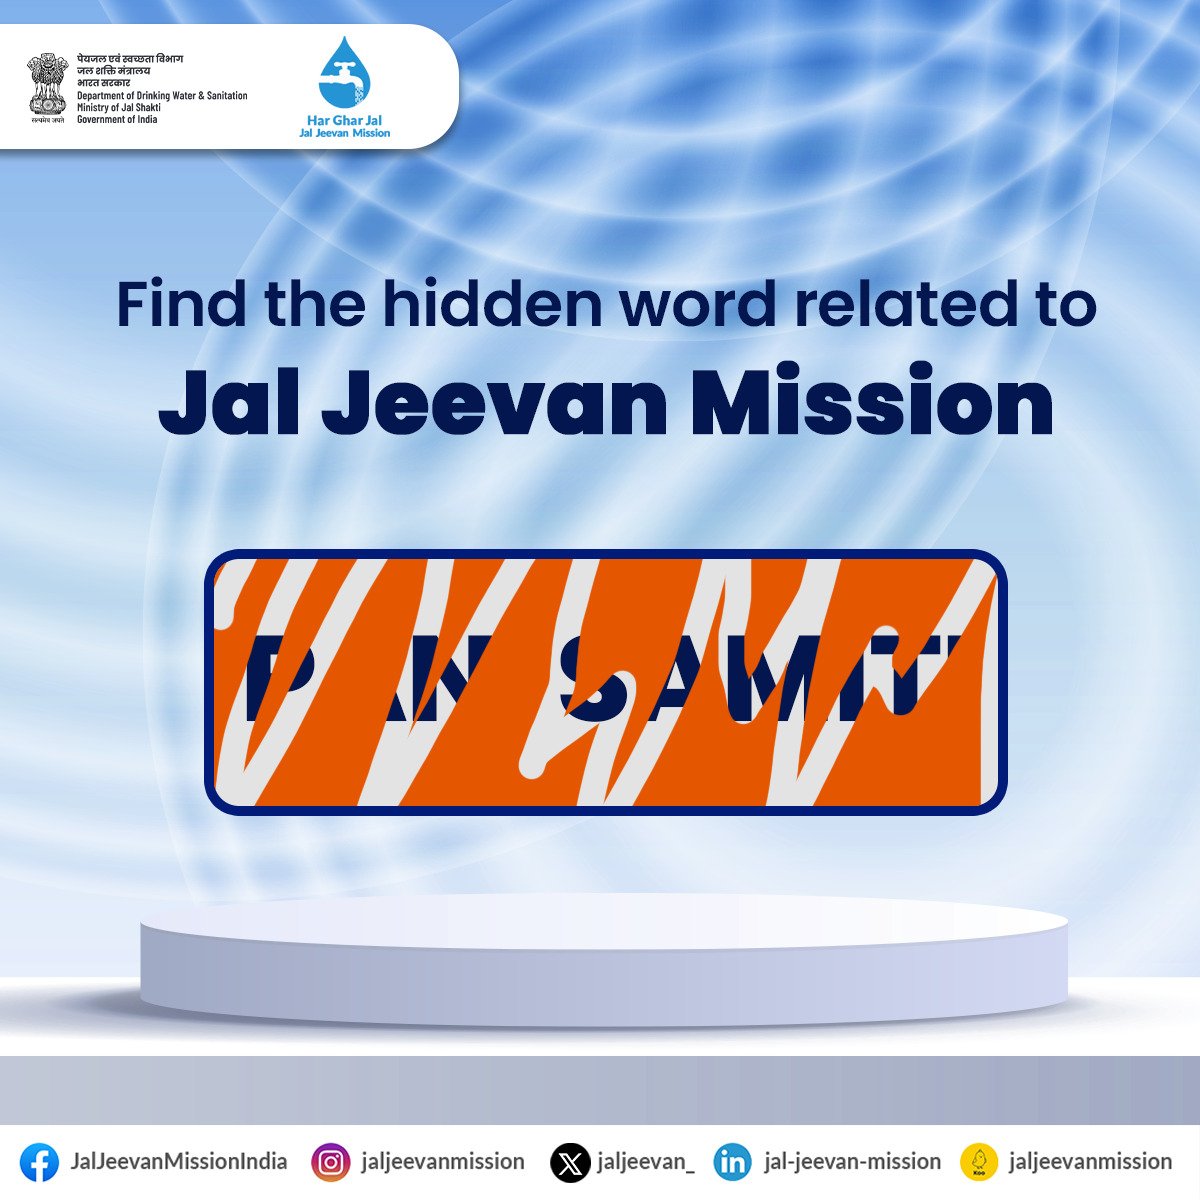 Spot the hidden term and share in the comment section.
#JalJeevanMission #HarGharJal